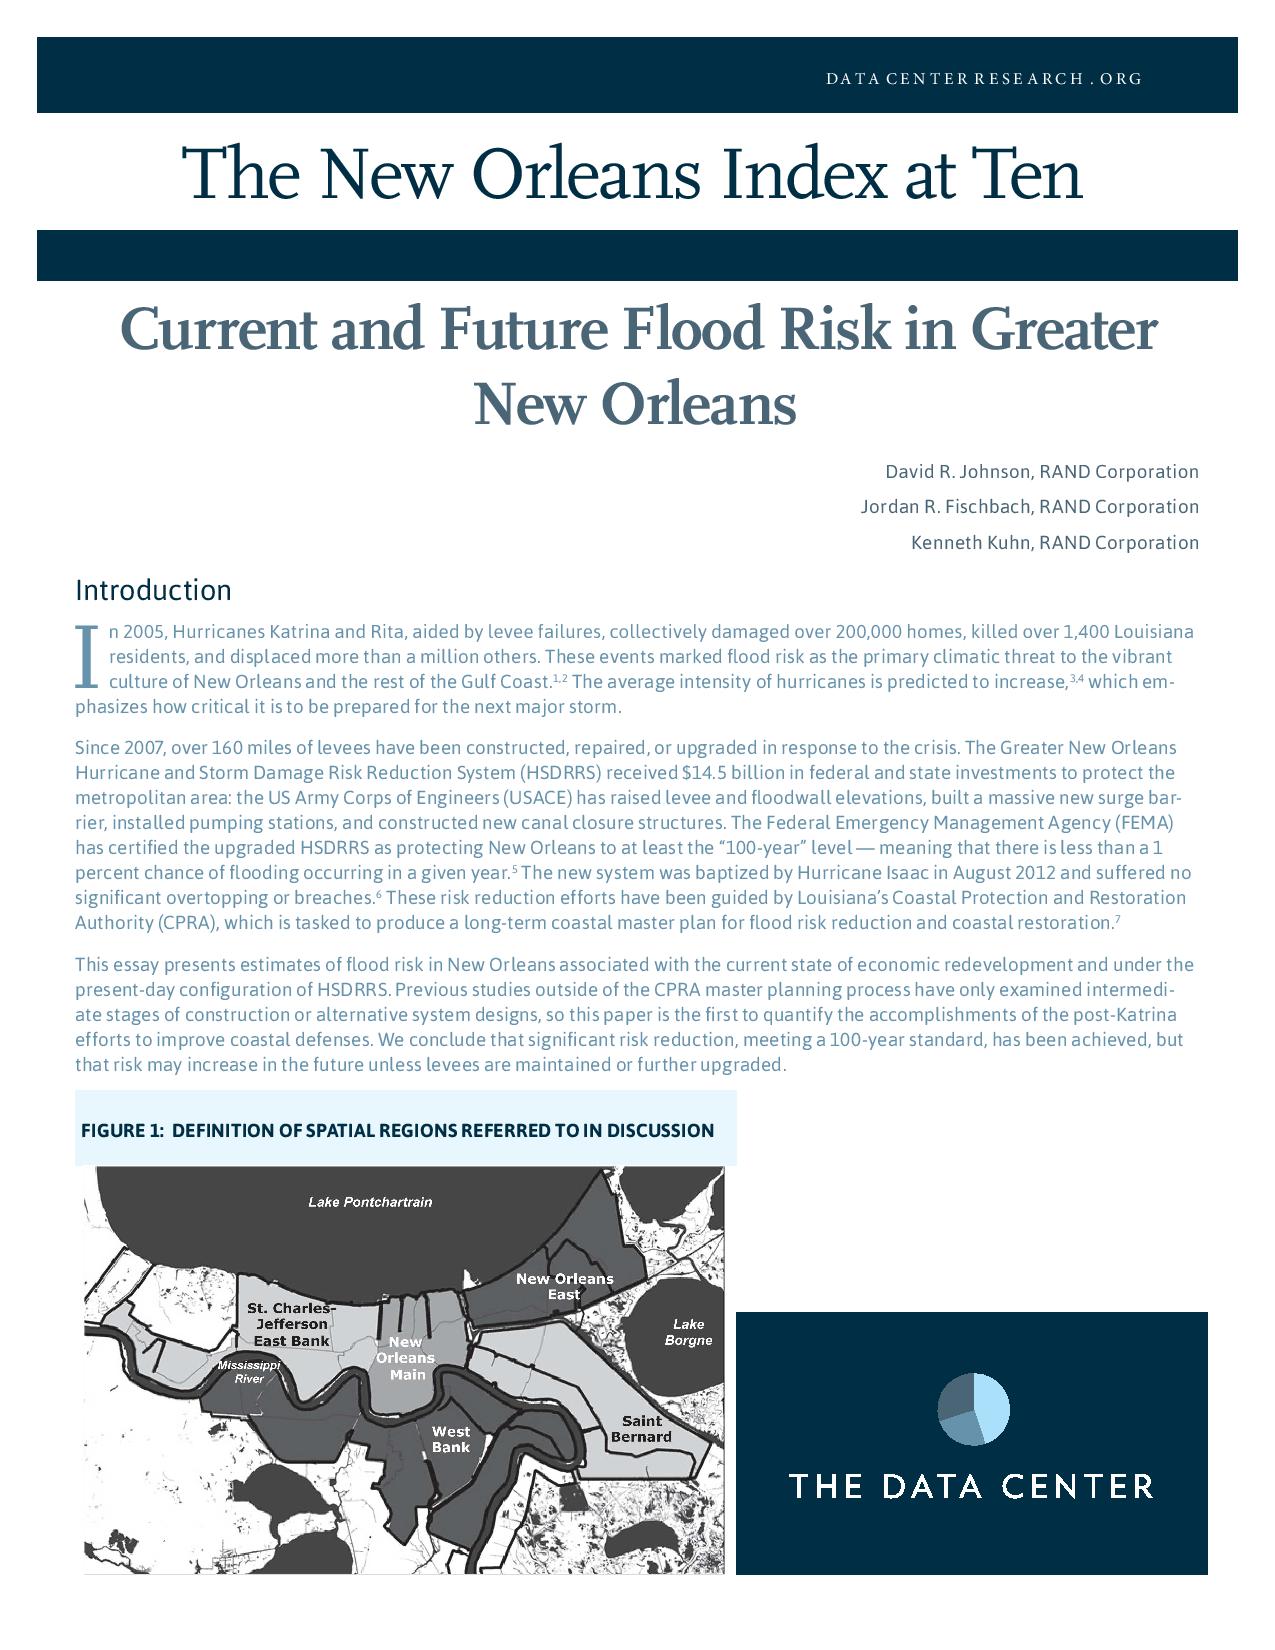 Current and Future Flood Risk in Greater New Orleans